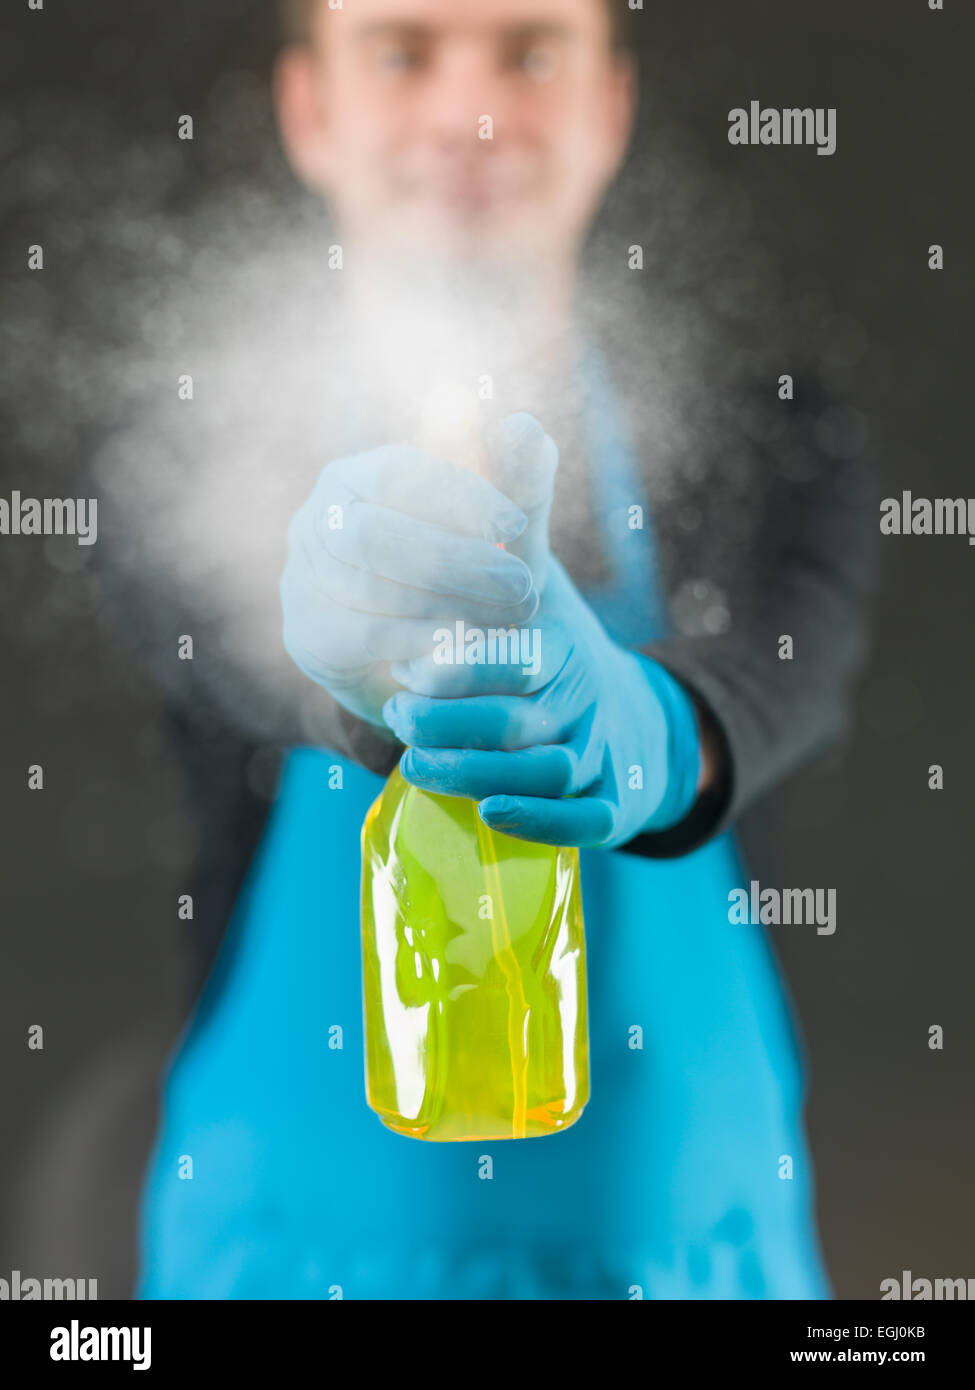 cleaning worker spraying liquid detergent on window surface in front of him Stock Photo